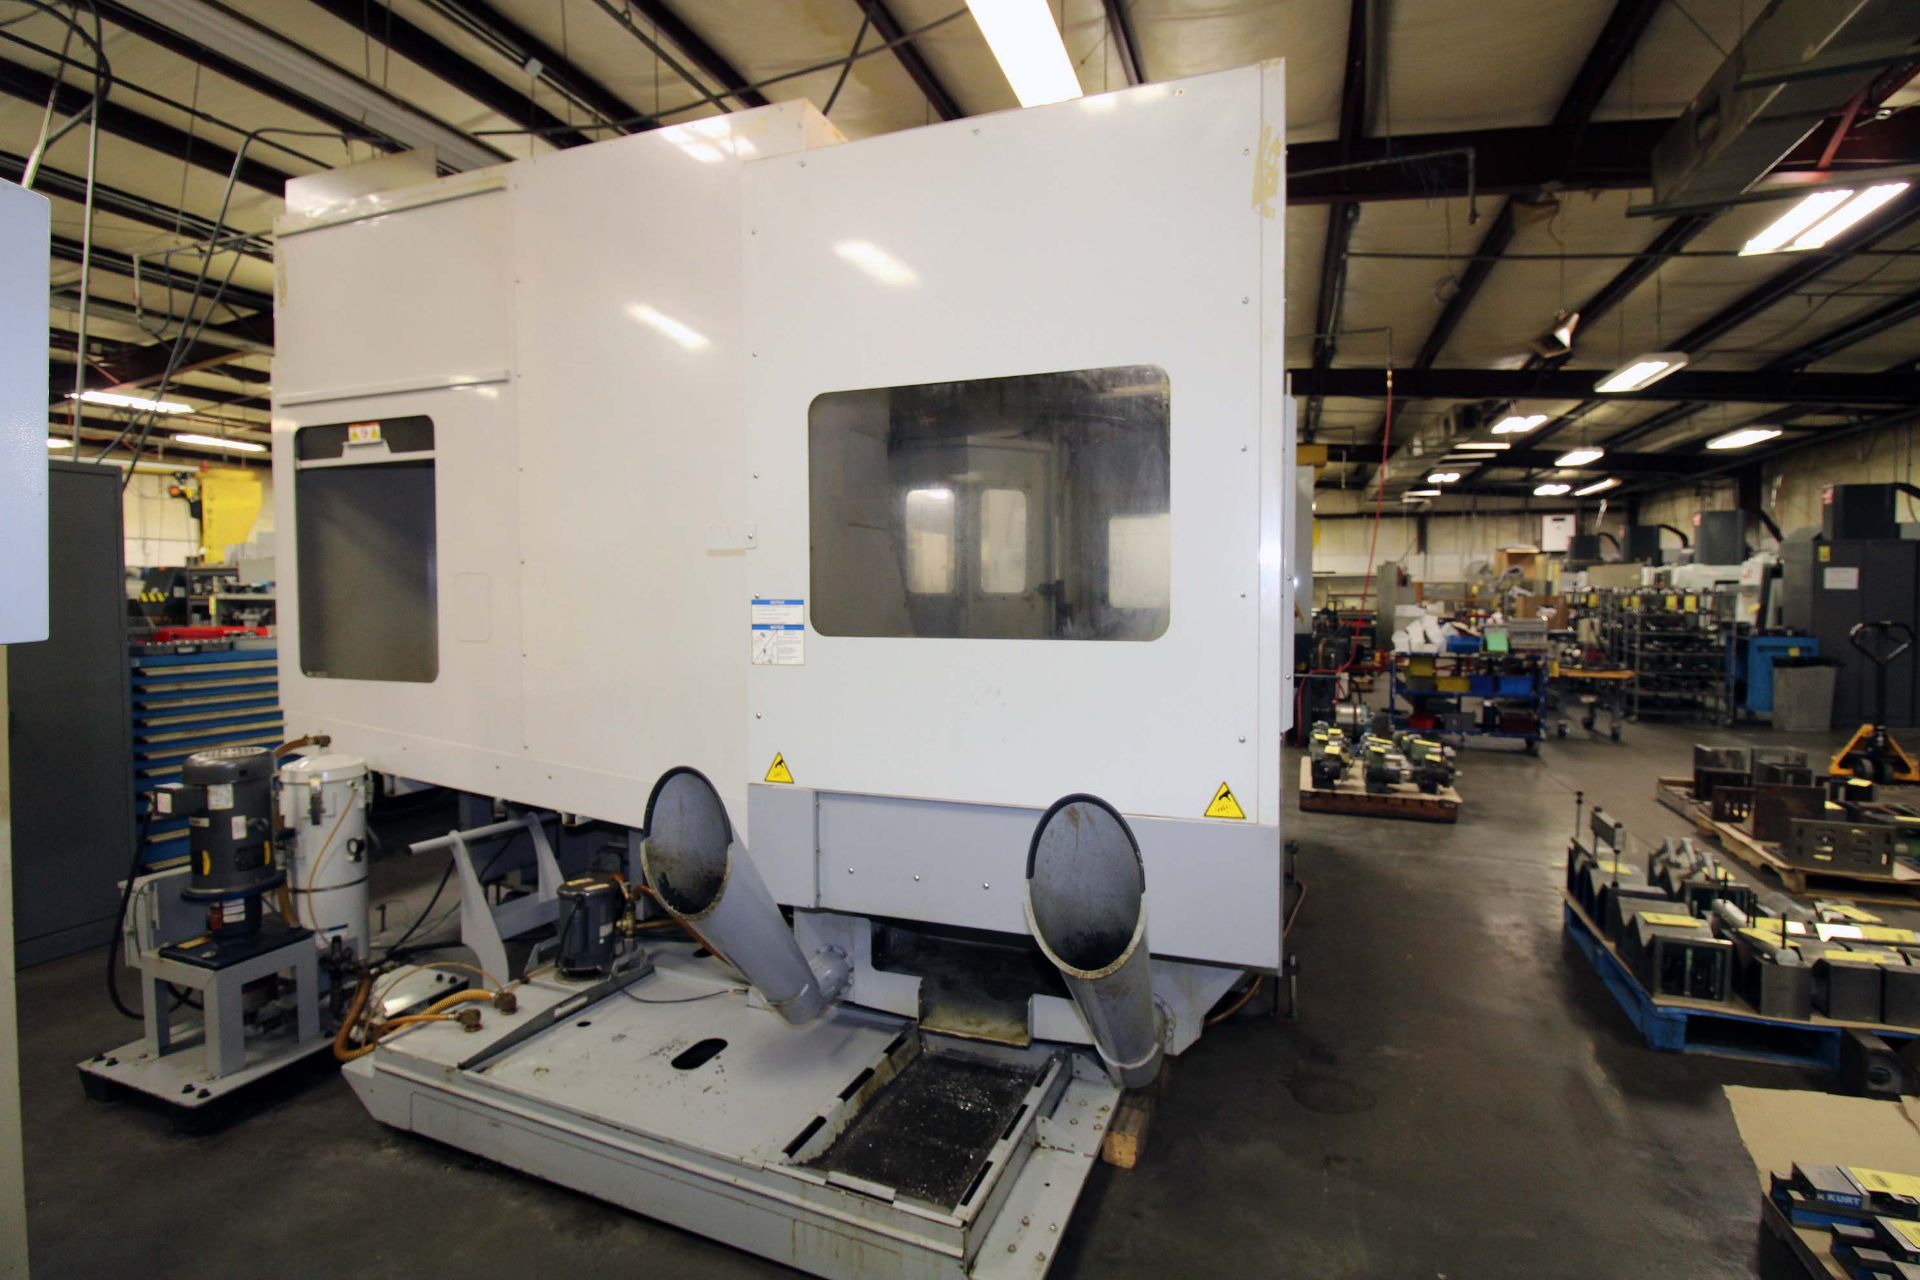 4-AXIS HORIZONTAL MACHINING CENTER, HAAS MDL. EC1600-4X, new 1/2009, 64” x 36” table, 30” built-in - Image 10 of 11